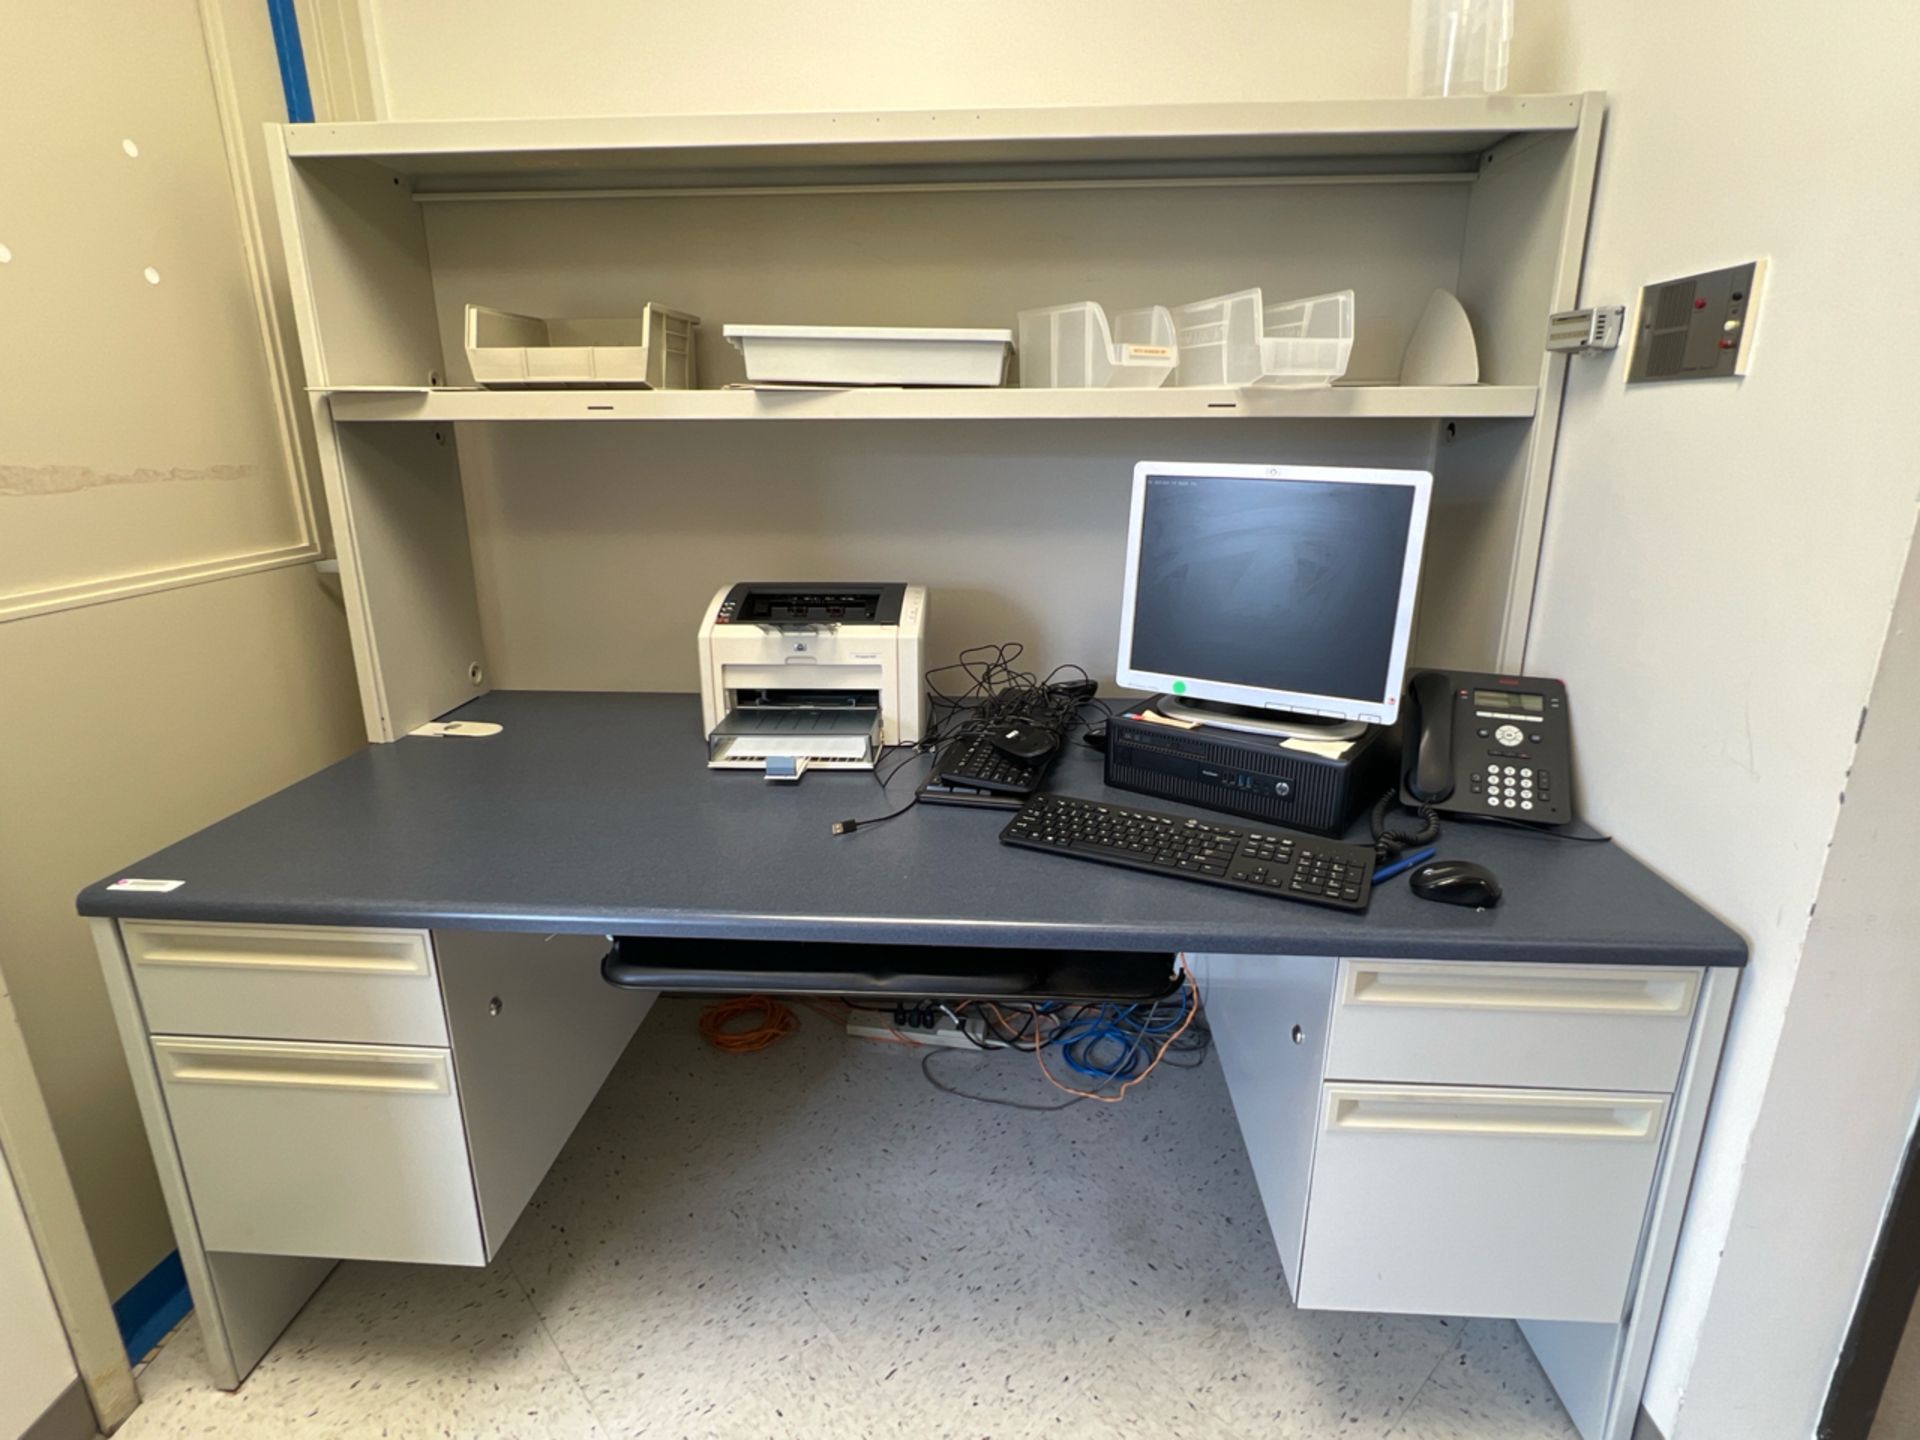 OFFICE TO INCLUDE: DESK WITH OVERHEAD STORAGE,HP LASERJET PRINTER, HP PRODESK CPU, HP MONITOR,